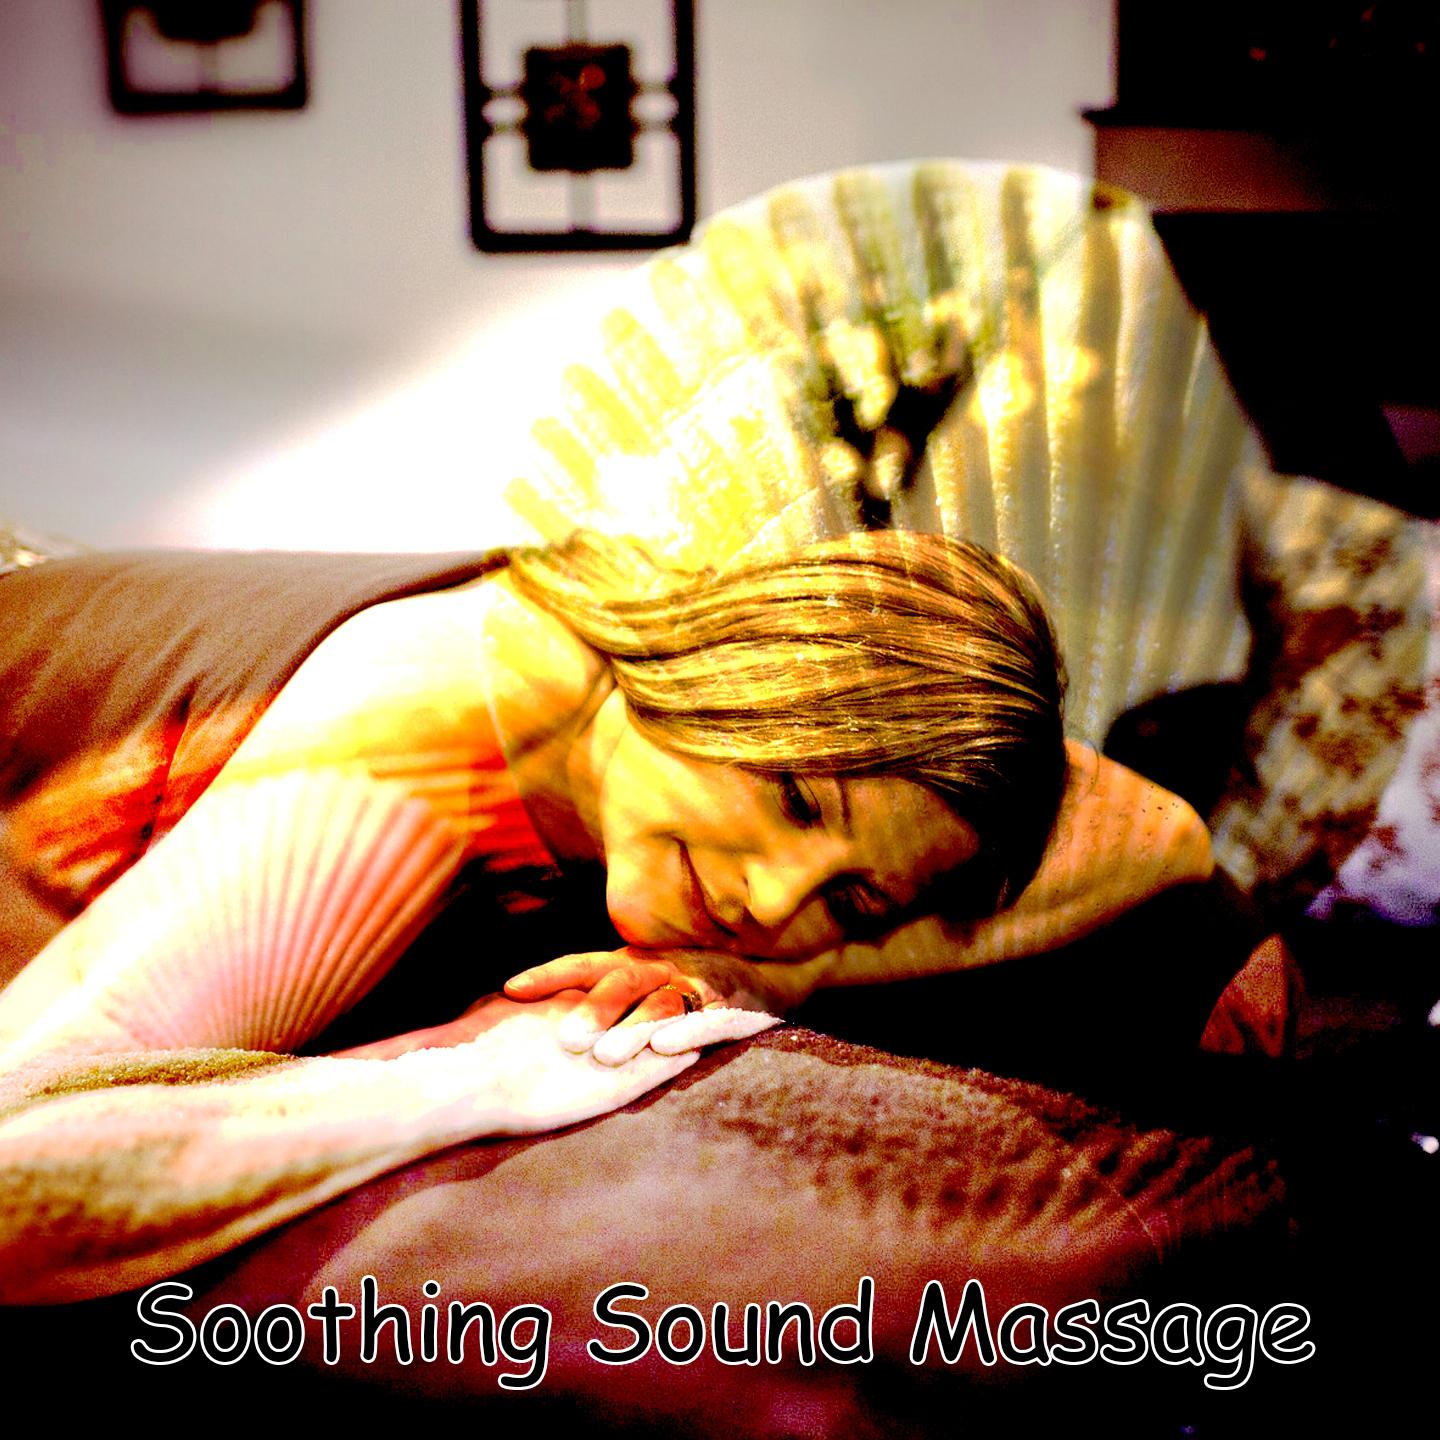 Soothing Sound Massage